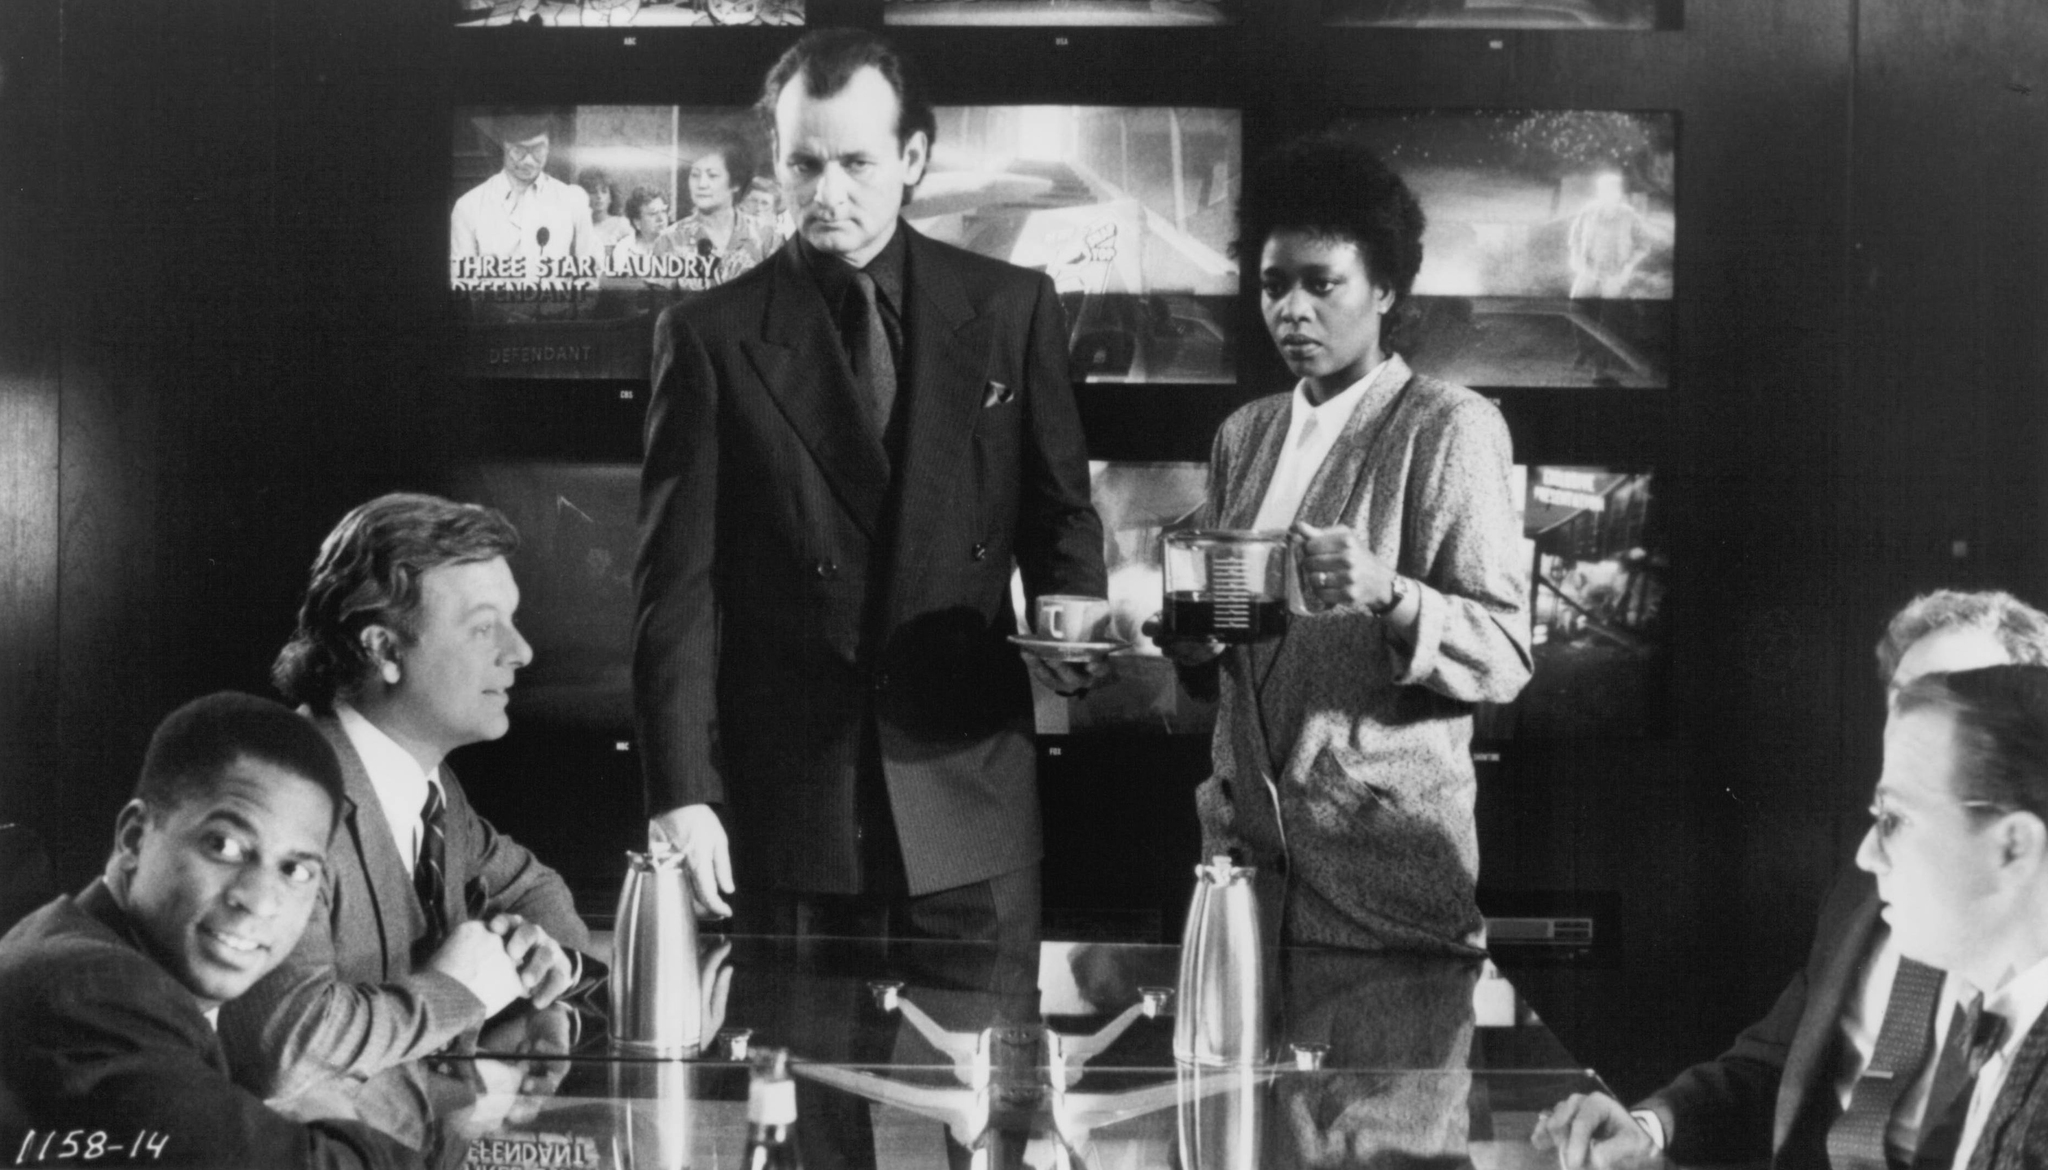 Still of Bill Murray and Alfre Woodard in Scrooged (1988)